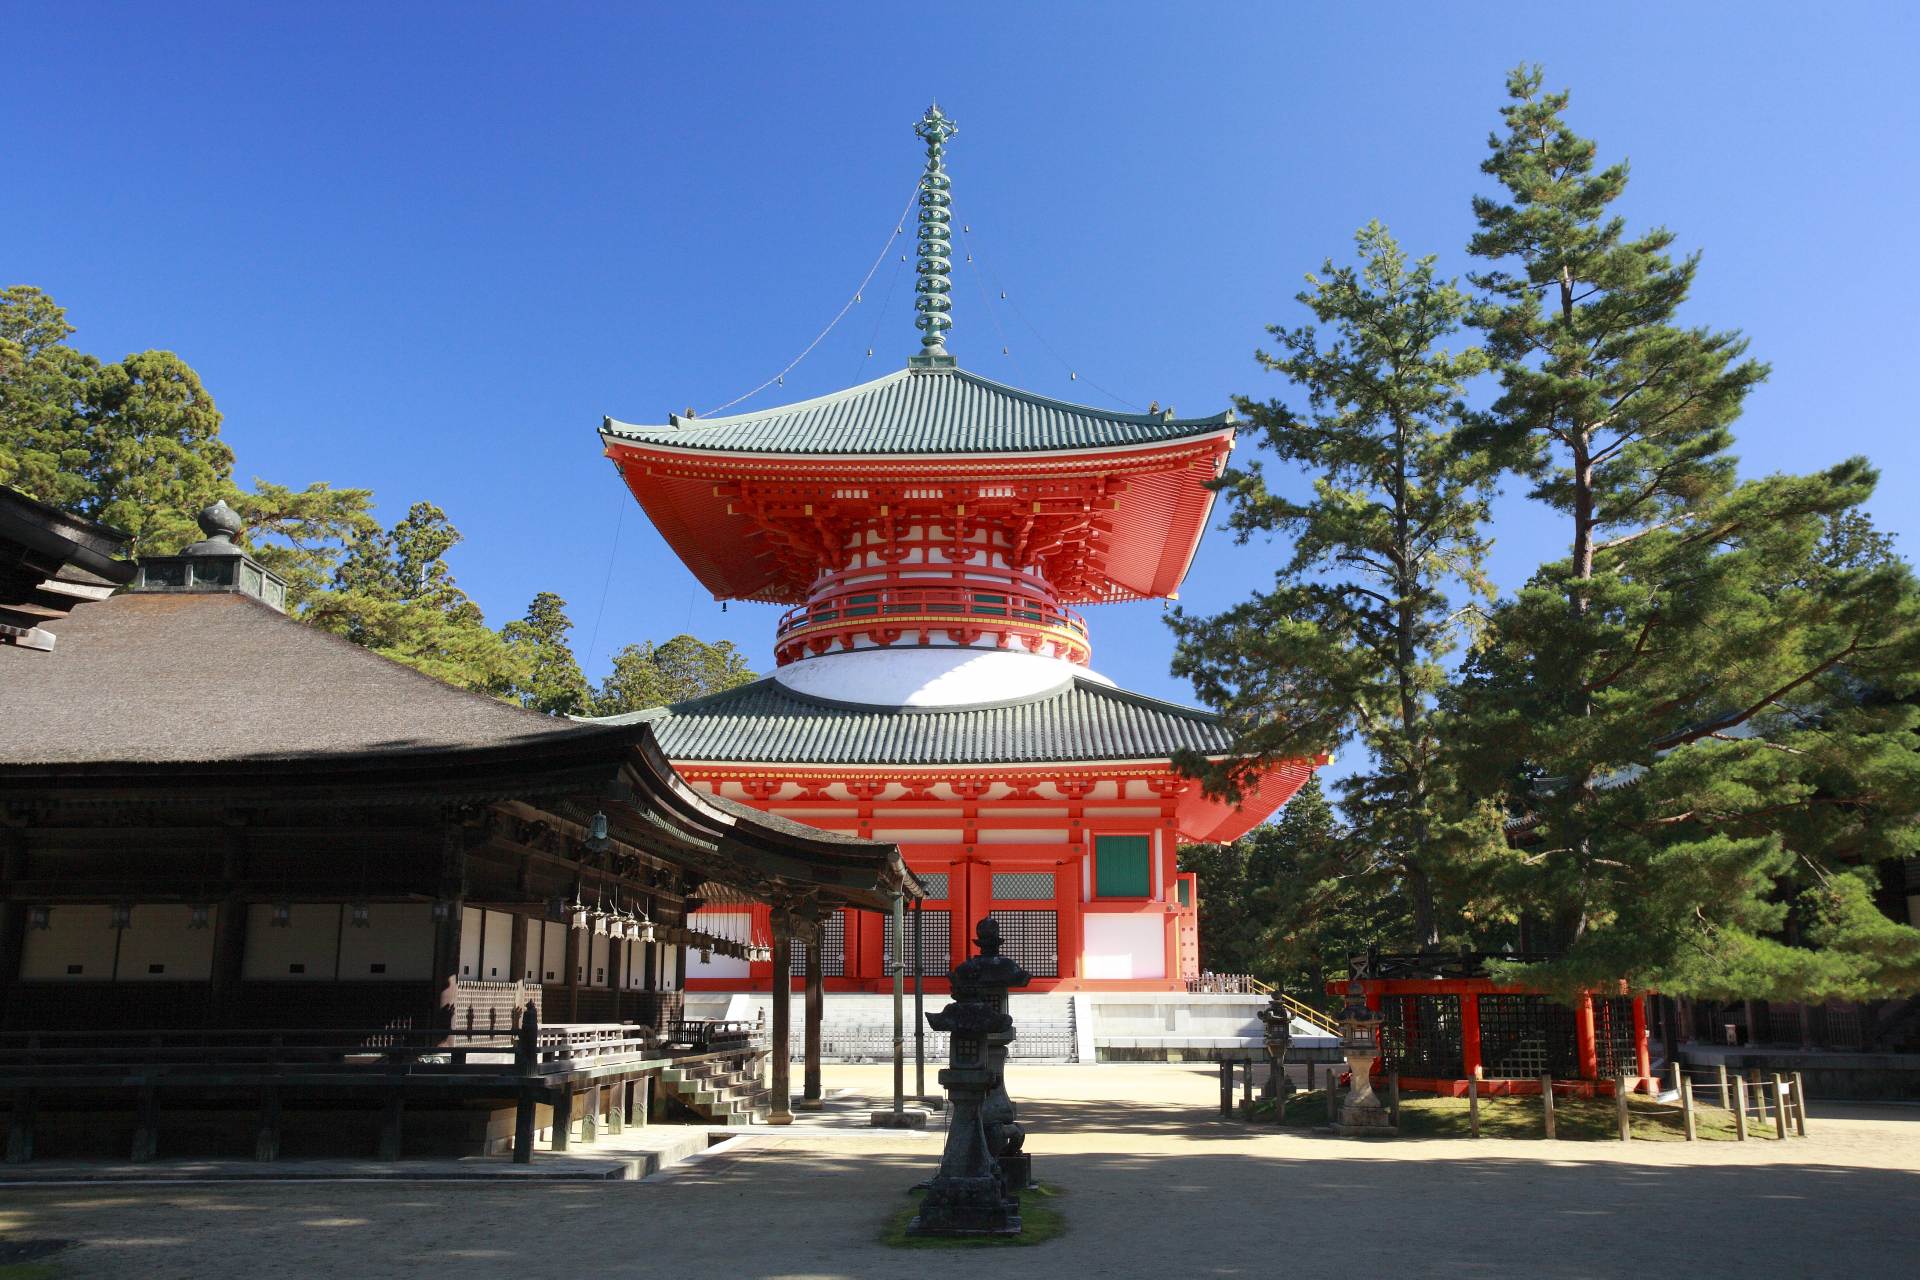 The Konpon Daito pagoda towering over the Danjo Garan temple complex was built as a training base for The Great Priest Kukai, and is said to be the first two-tiered “tahoto” style pagoda in Japan.  